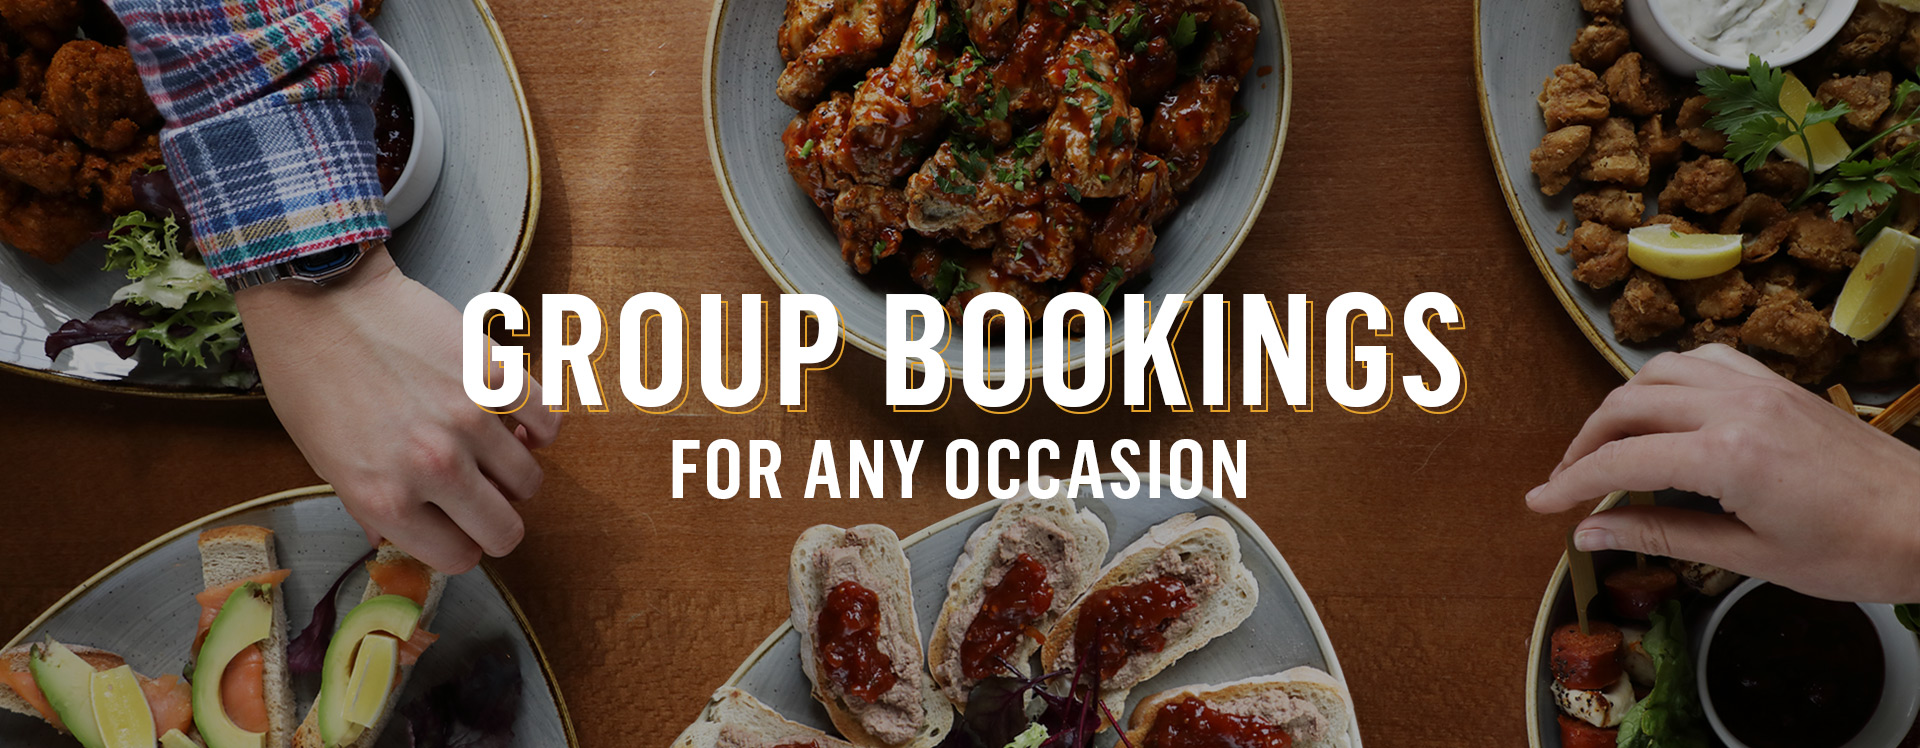 Group Bookings at The St George's Tavern